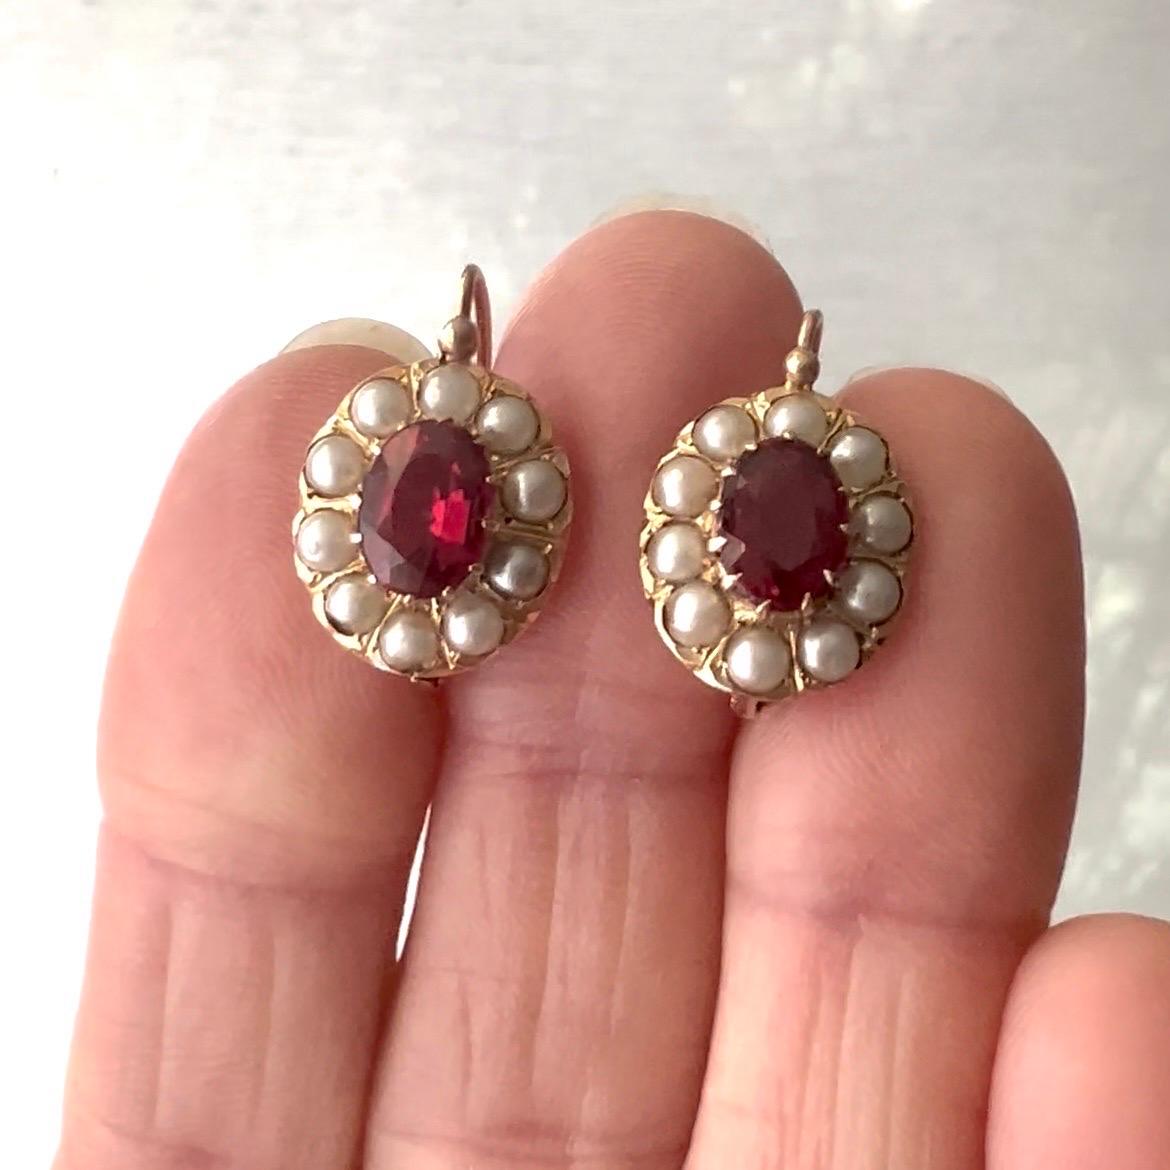 These antique ruby and seed pearl earrings are perfectly accented with its delicate gold openwork frame. The lovely translucent pinkish rubies and bright pearls make the earrings very attractive.

A beautiful 14 karat gold openwork frame adorns